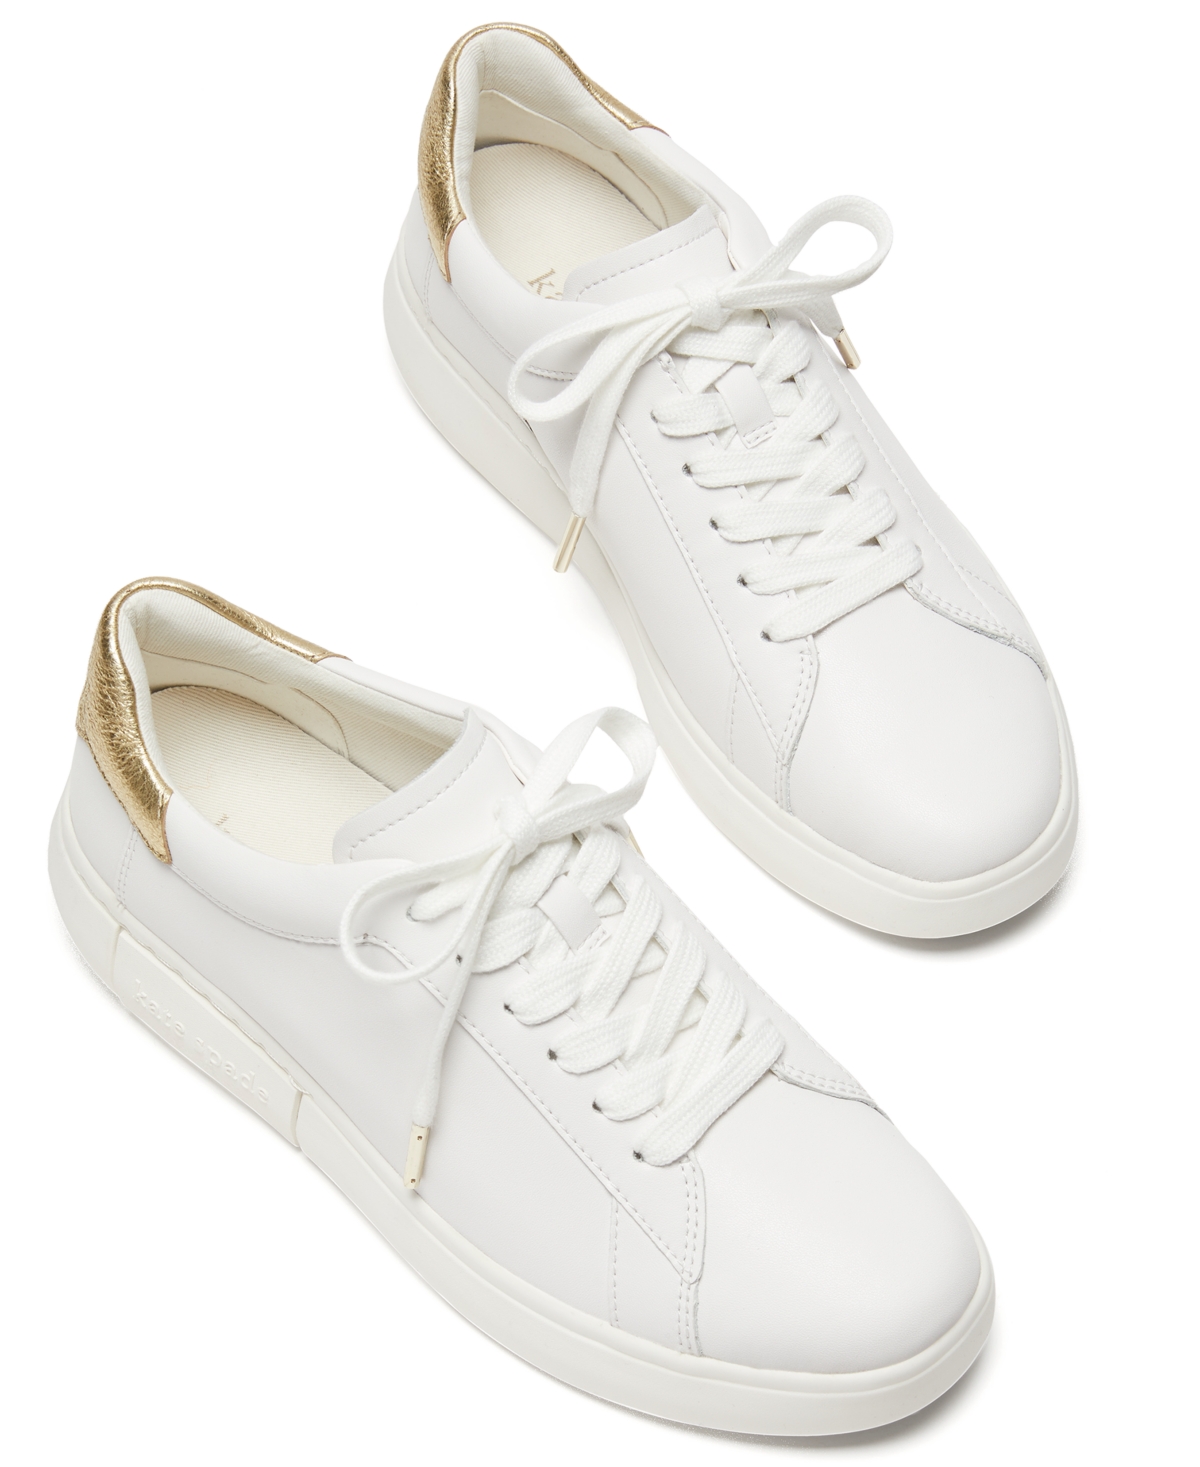 Women's Lift Sneakers - Optic White/pale Gold